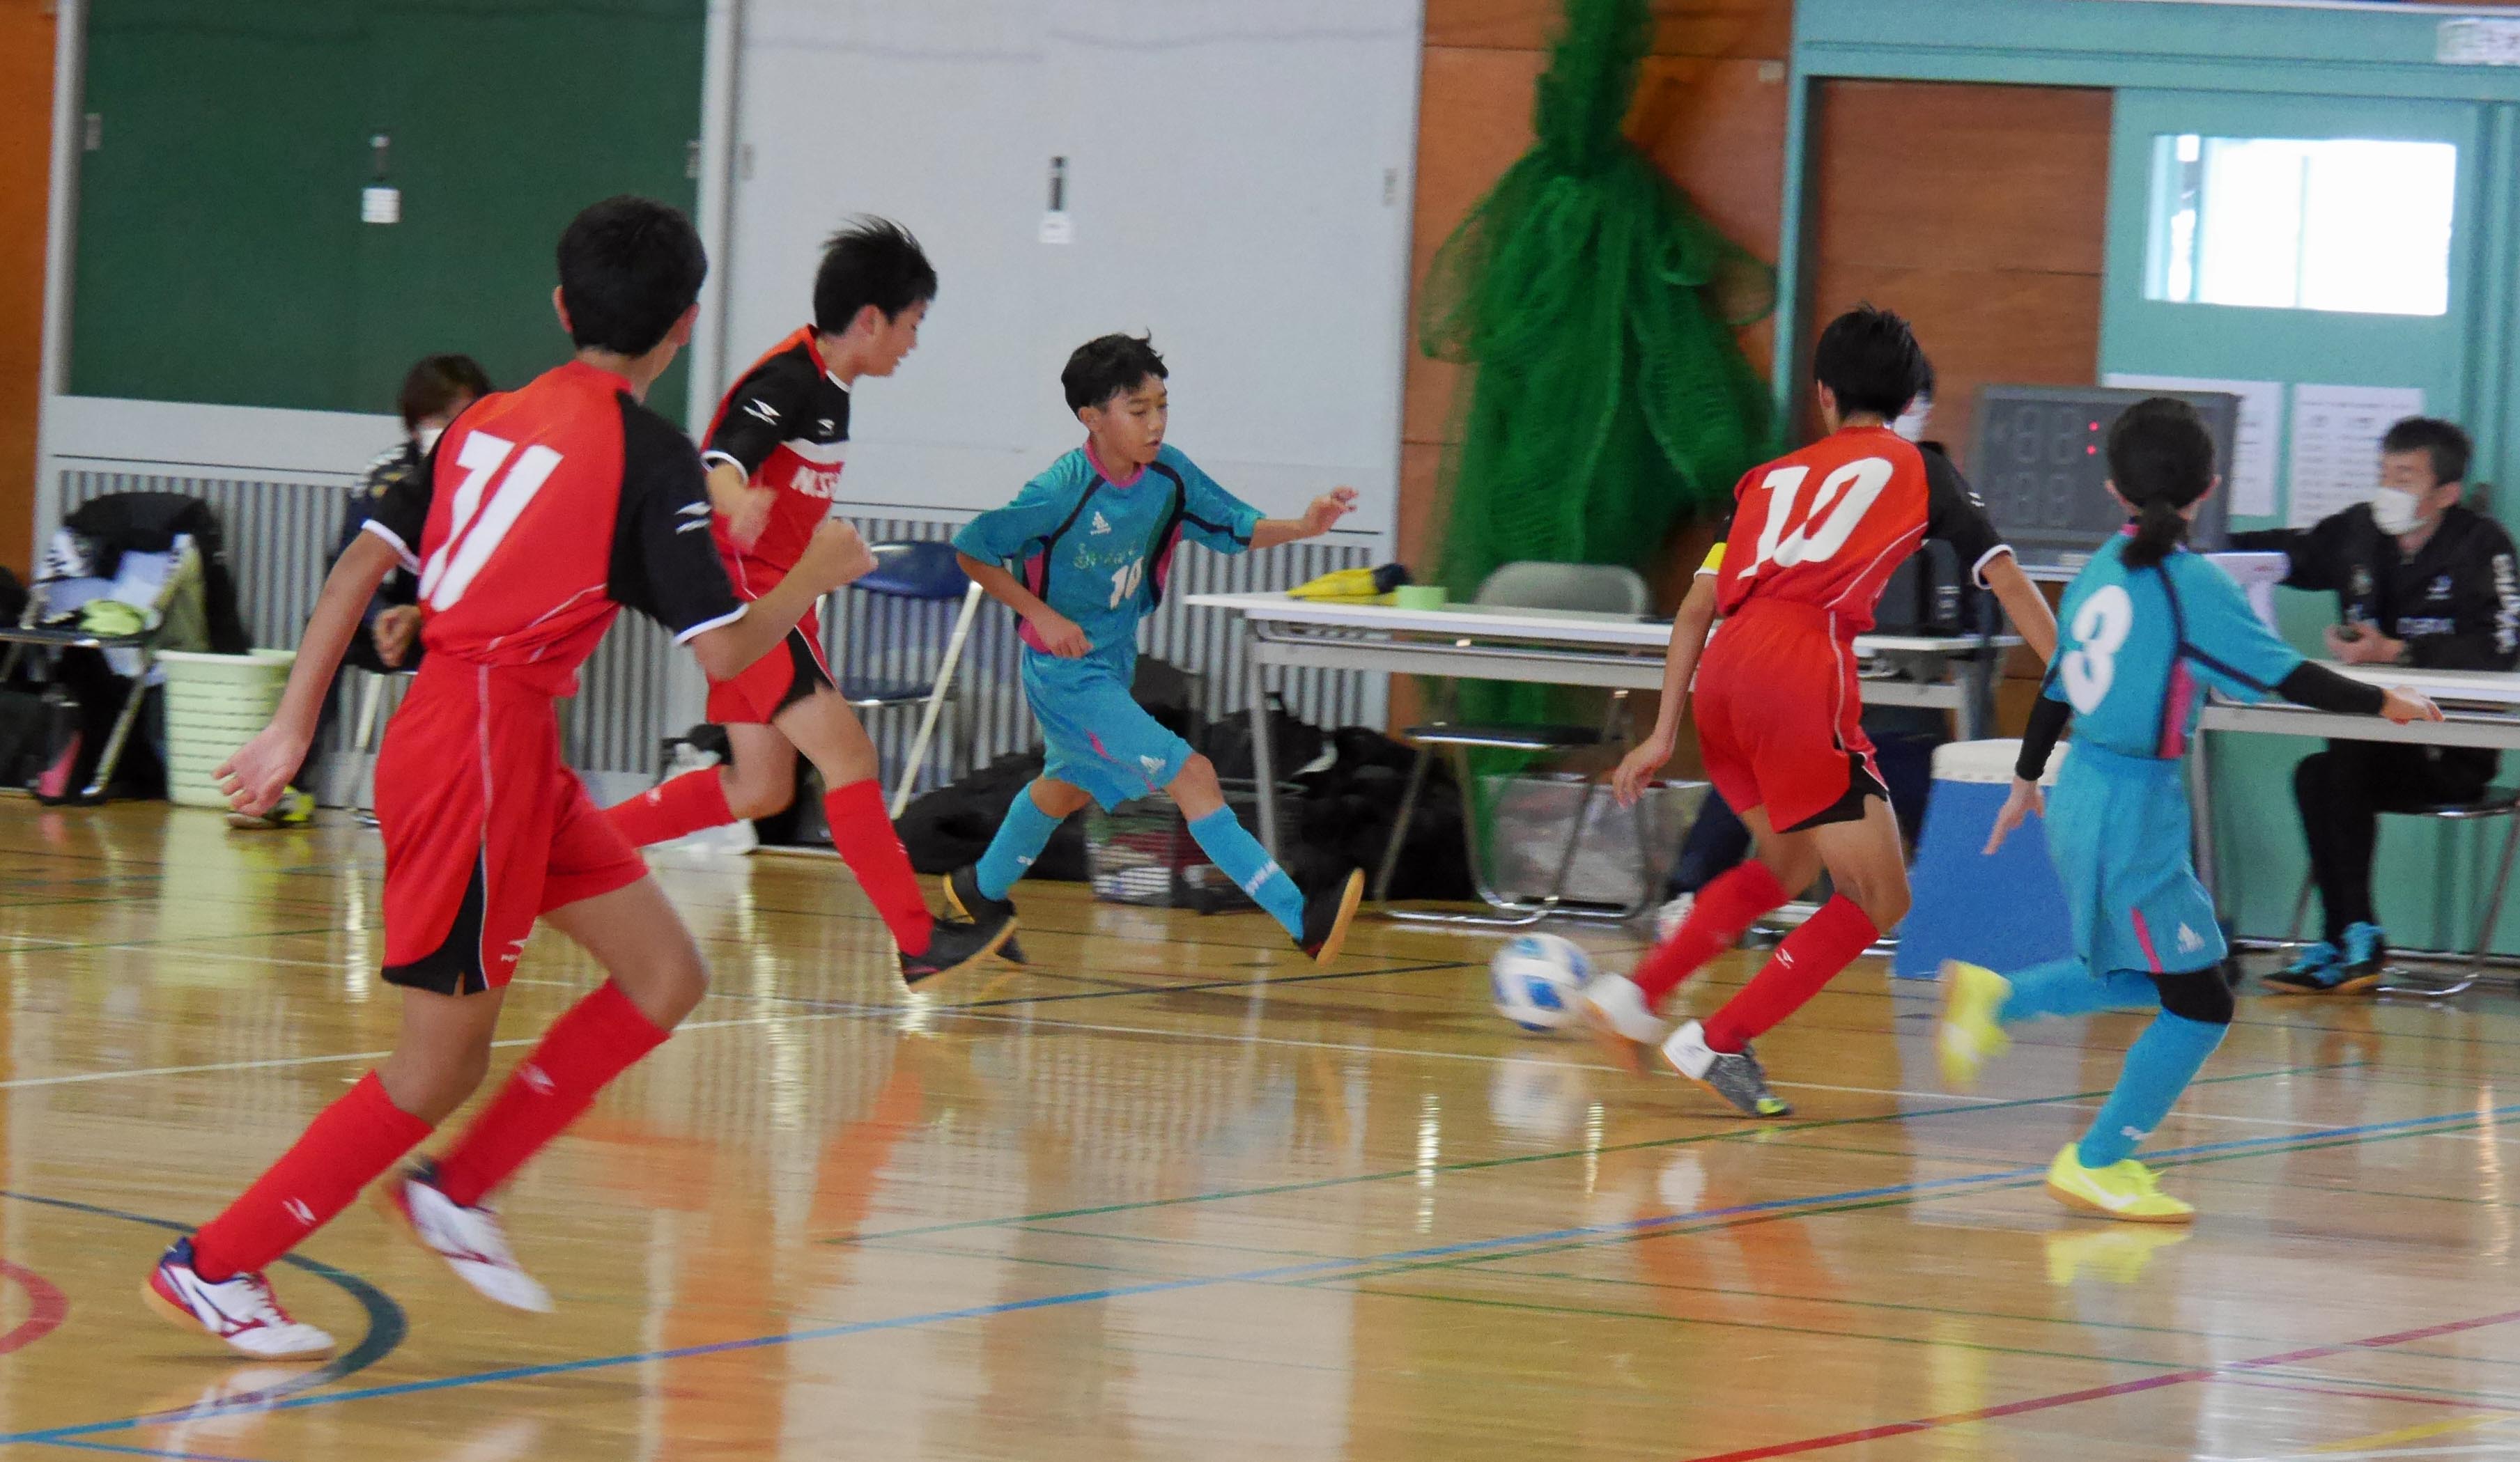 20221127_MUSASHICUP01-01